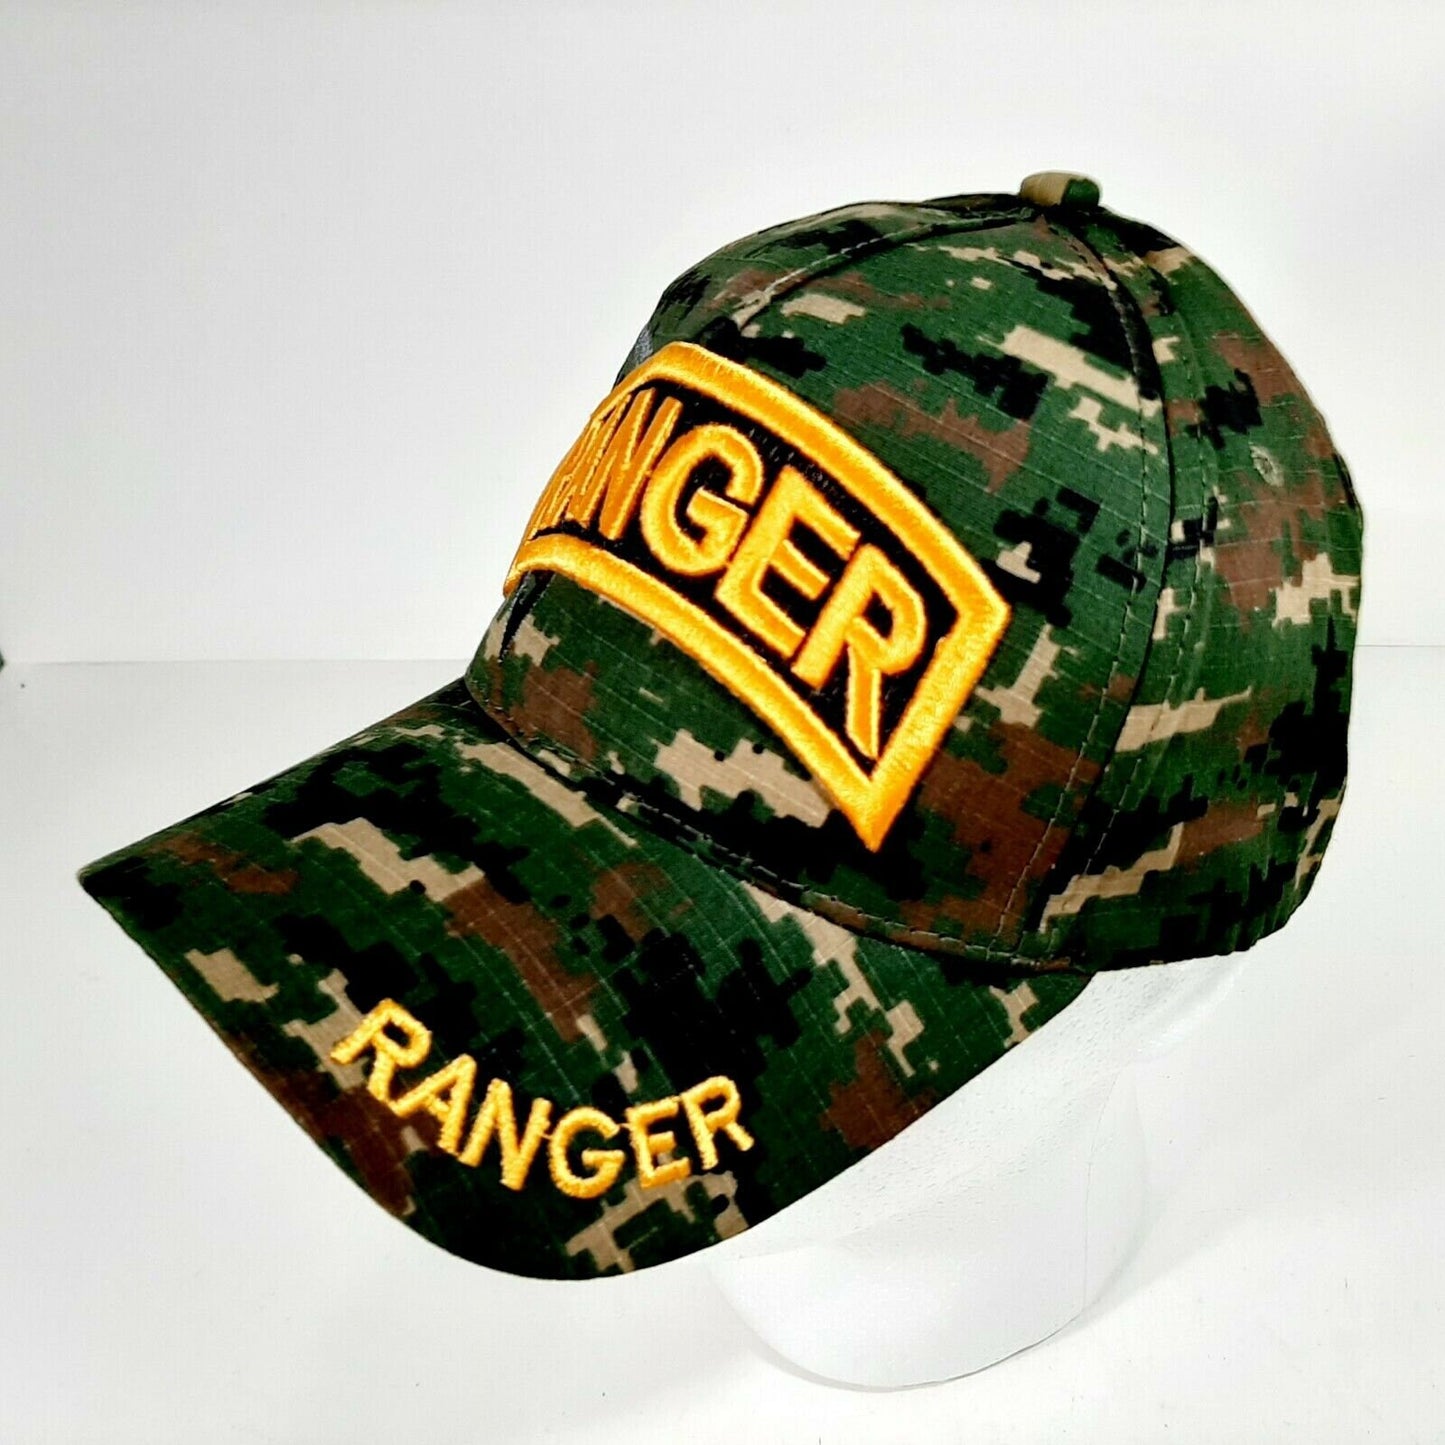 US Army Ranger Men's Camouflage Ball Cap One Size 100% Cotton Embroidered